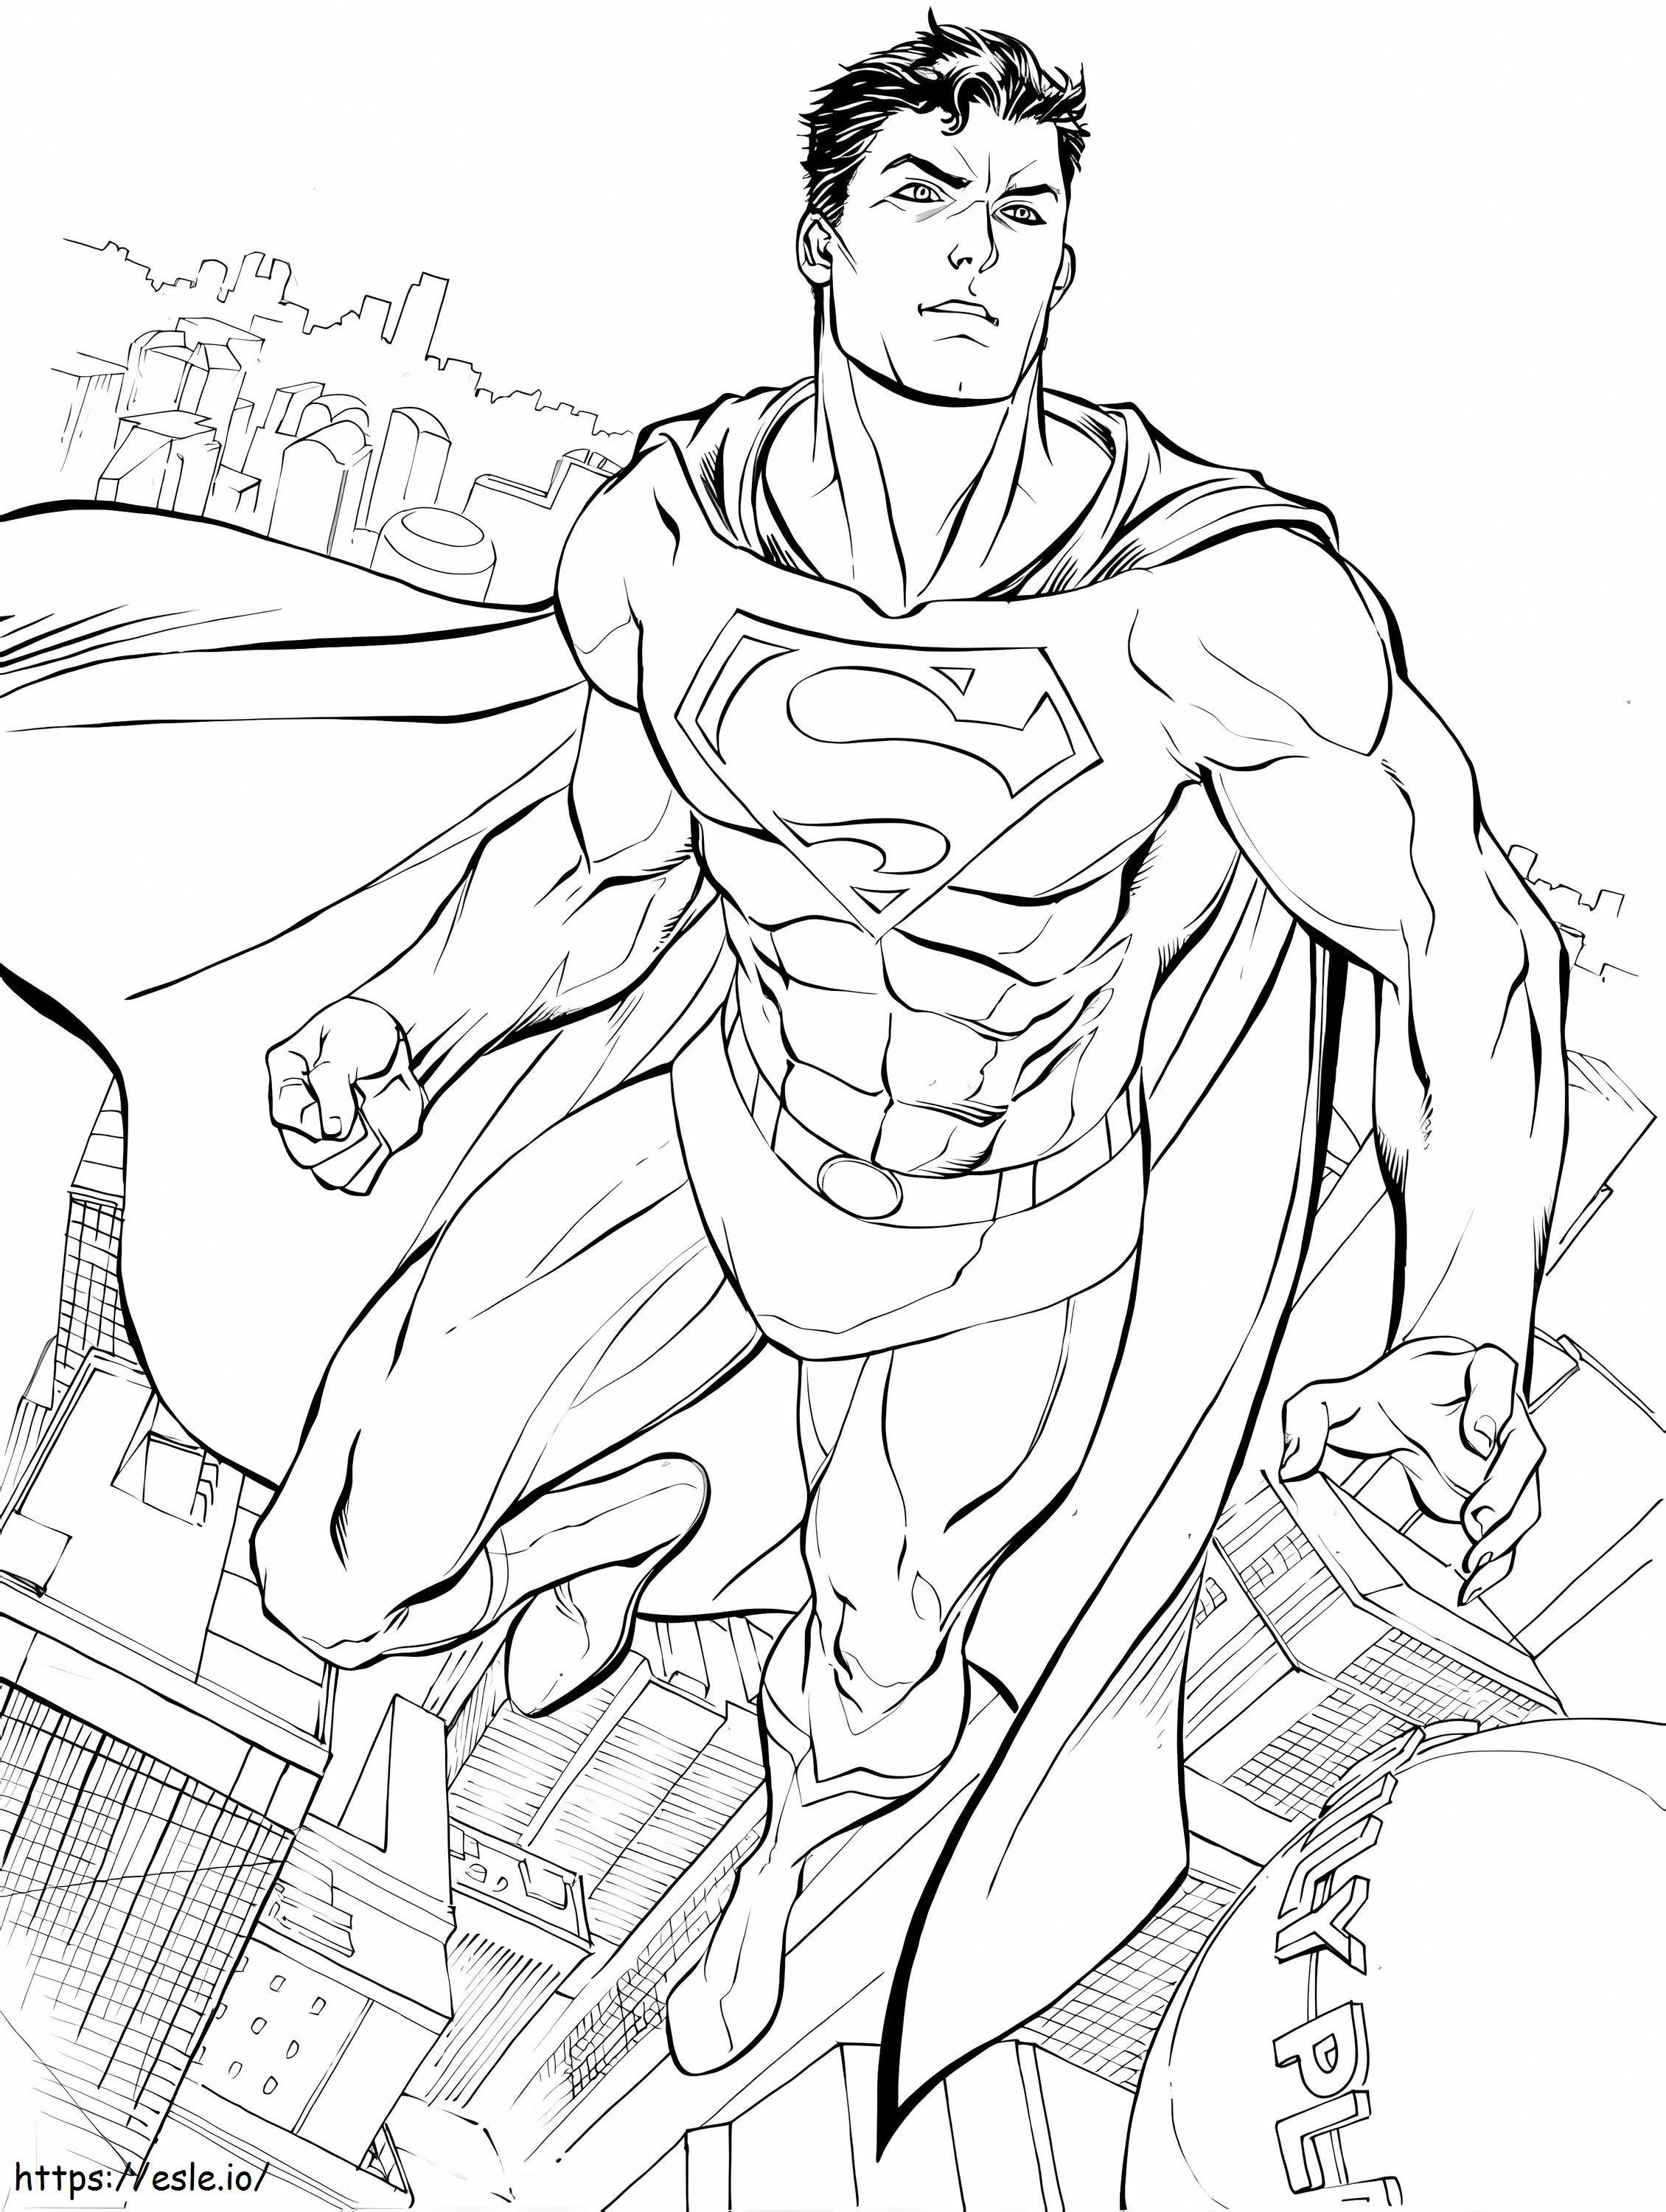 Superman Flying In The City coloring page